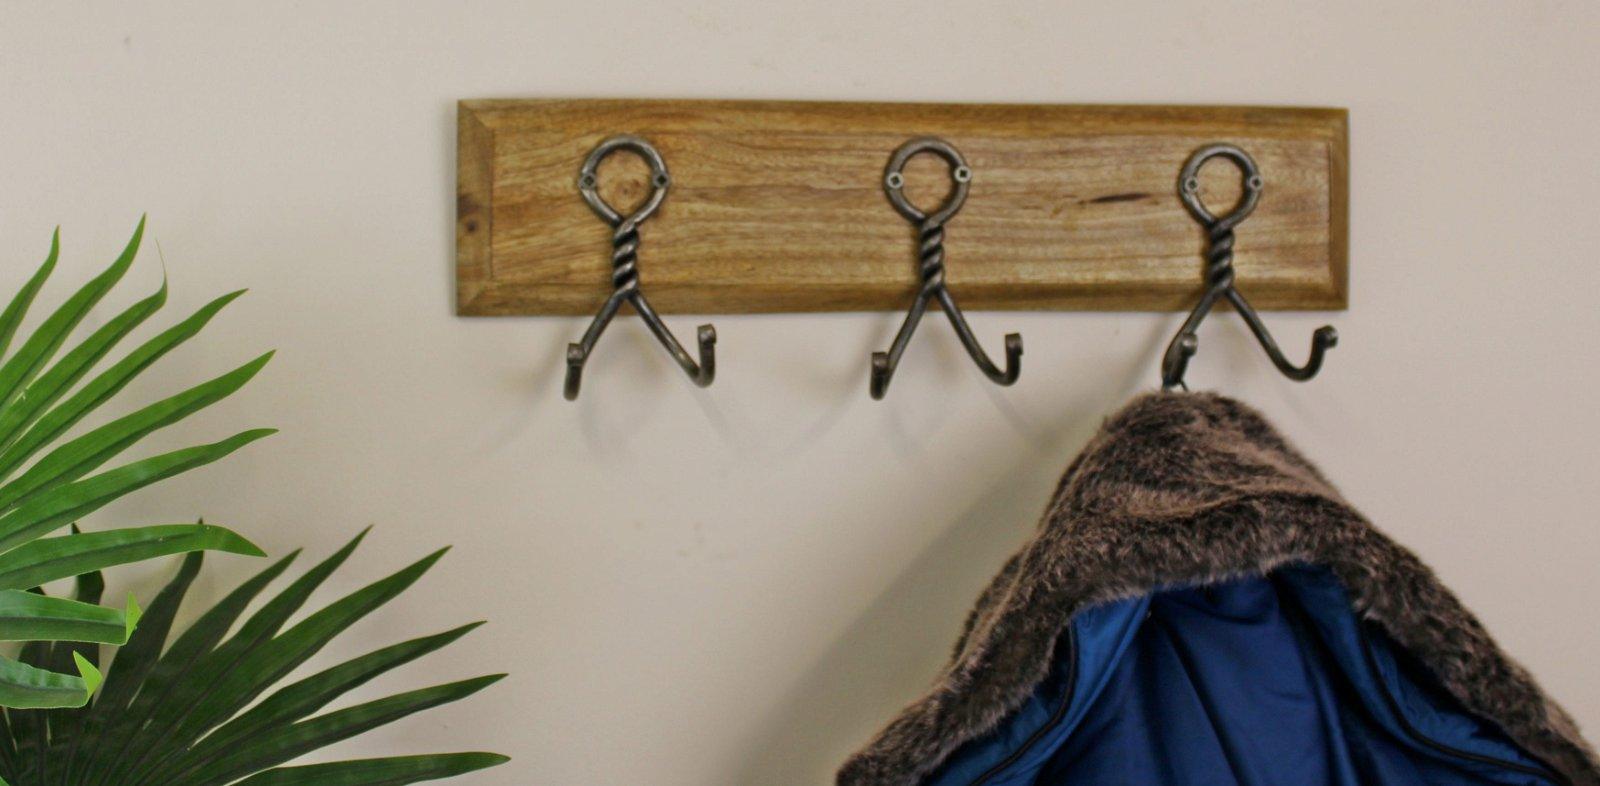 View 3 Piece Double Metal Hooks On Wooden Base information